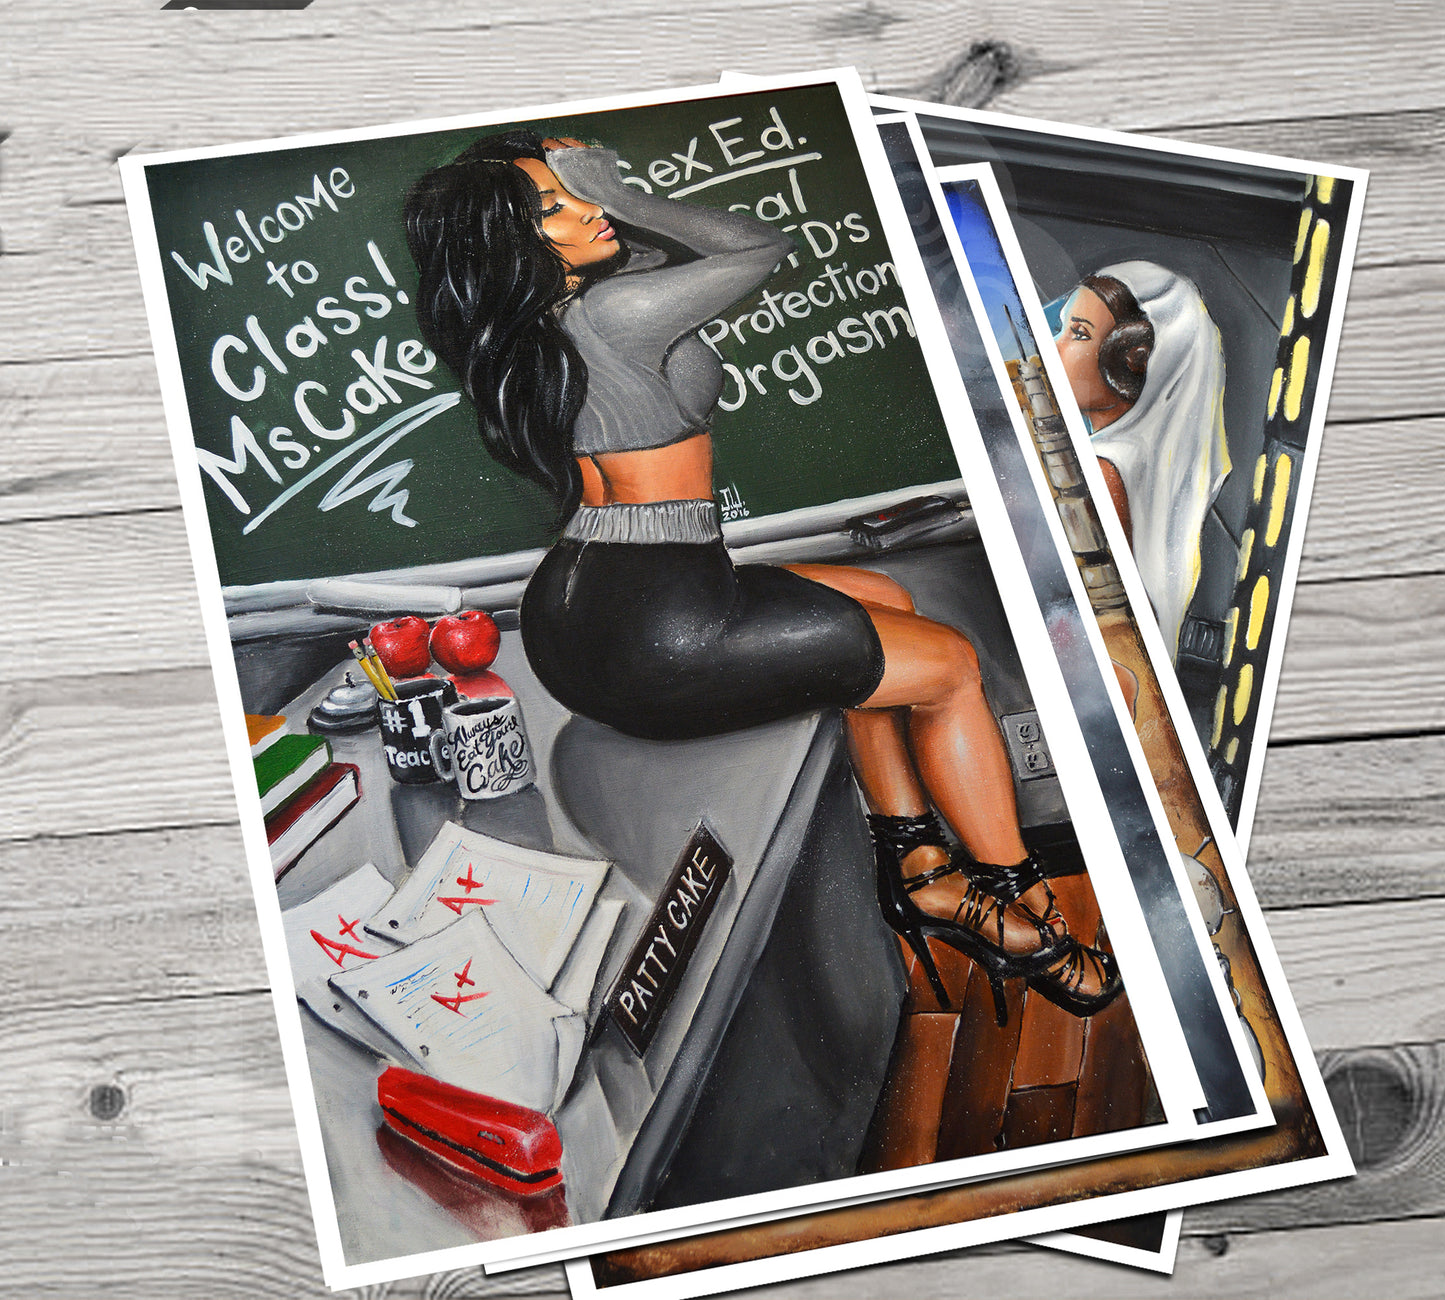 NEW JEREMY WORST Ms Cake Artwork Signed Print poster Patty Cake sexy teacher student mexican latino tall hot nsfw Nudes tattoo hentai xvideo